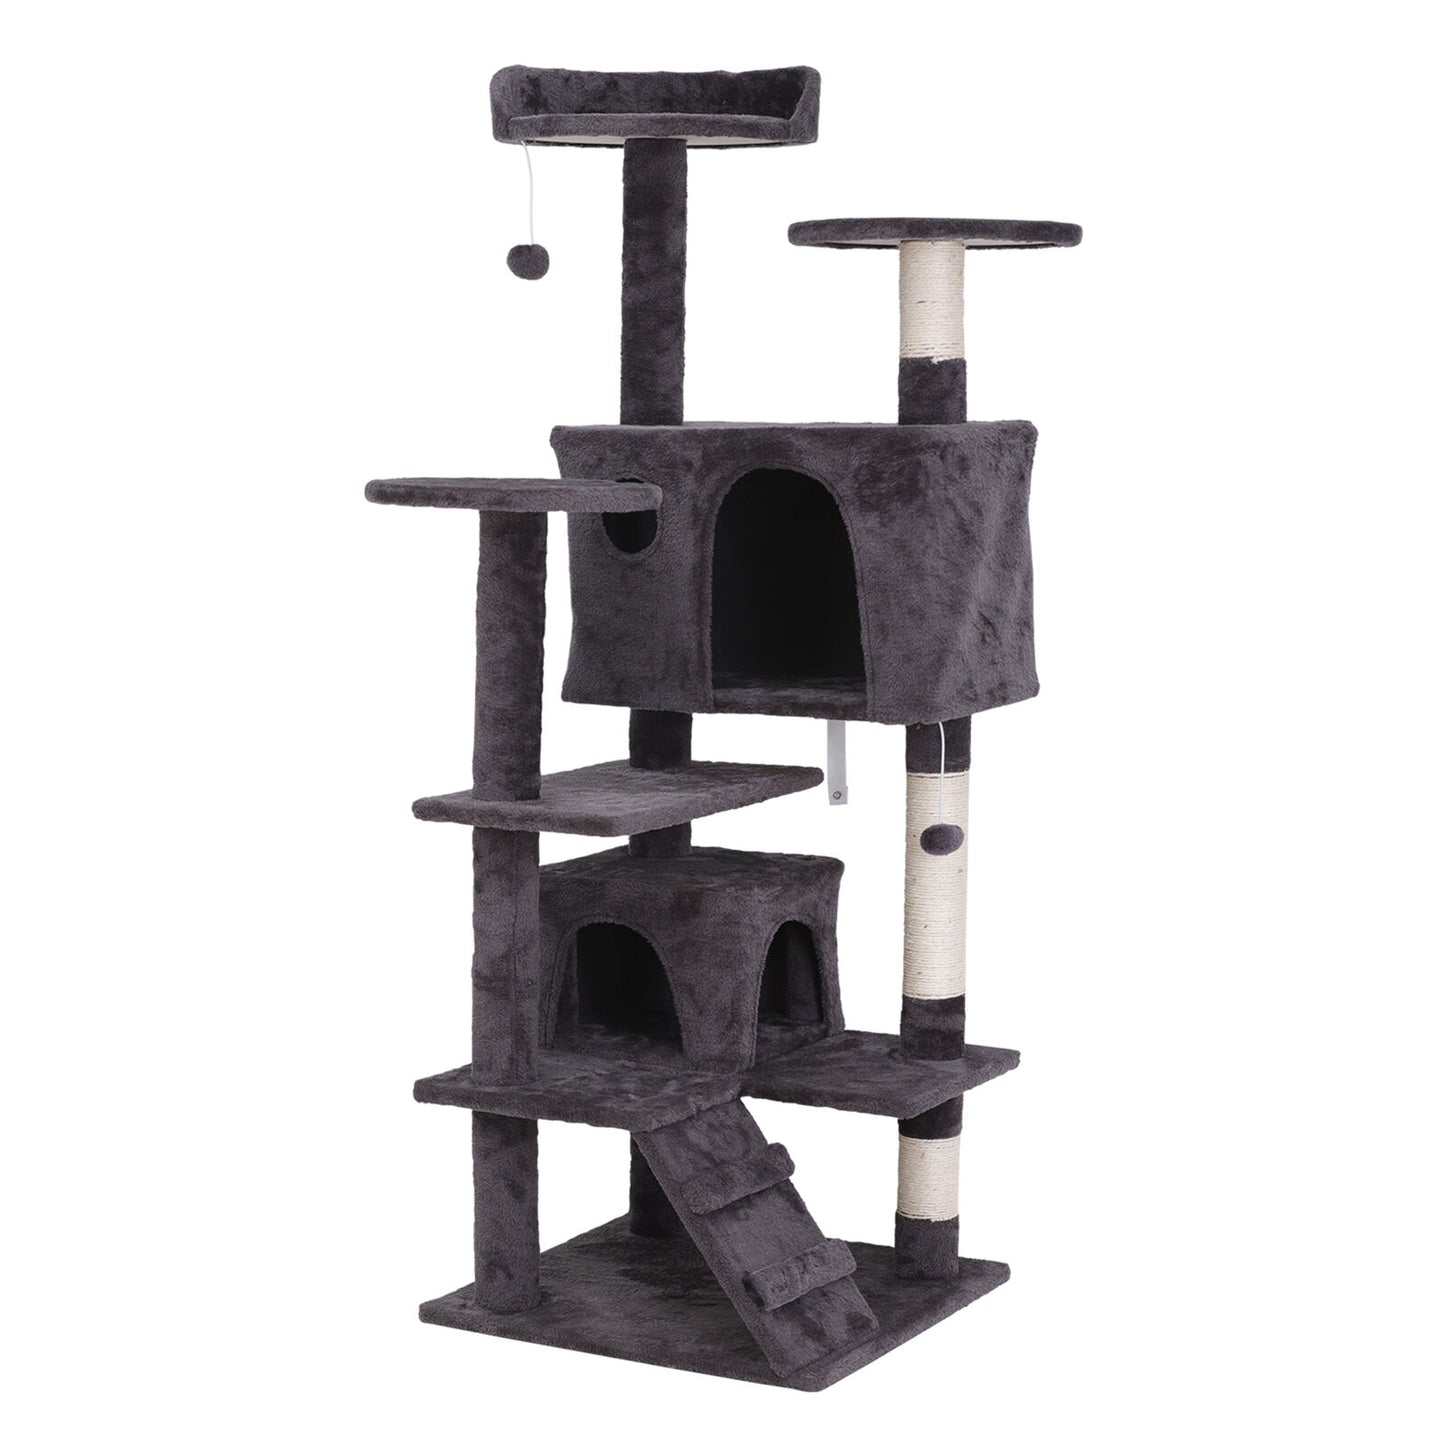 Durable 53" Cat Tree Activity Tower Pet  with Scratching Posts  Ladders Indoor